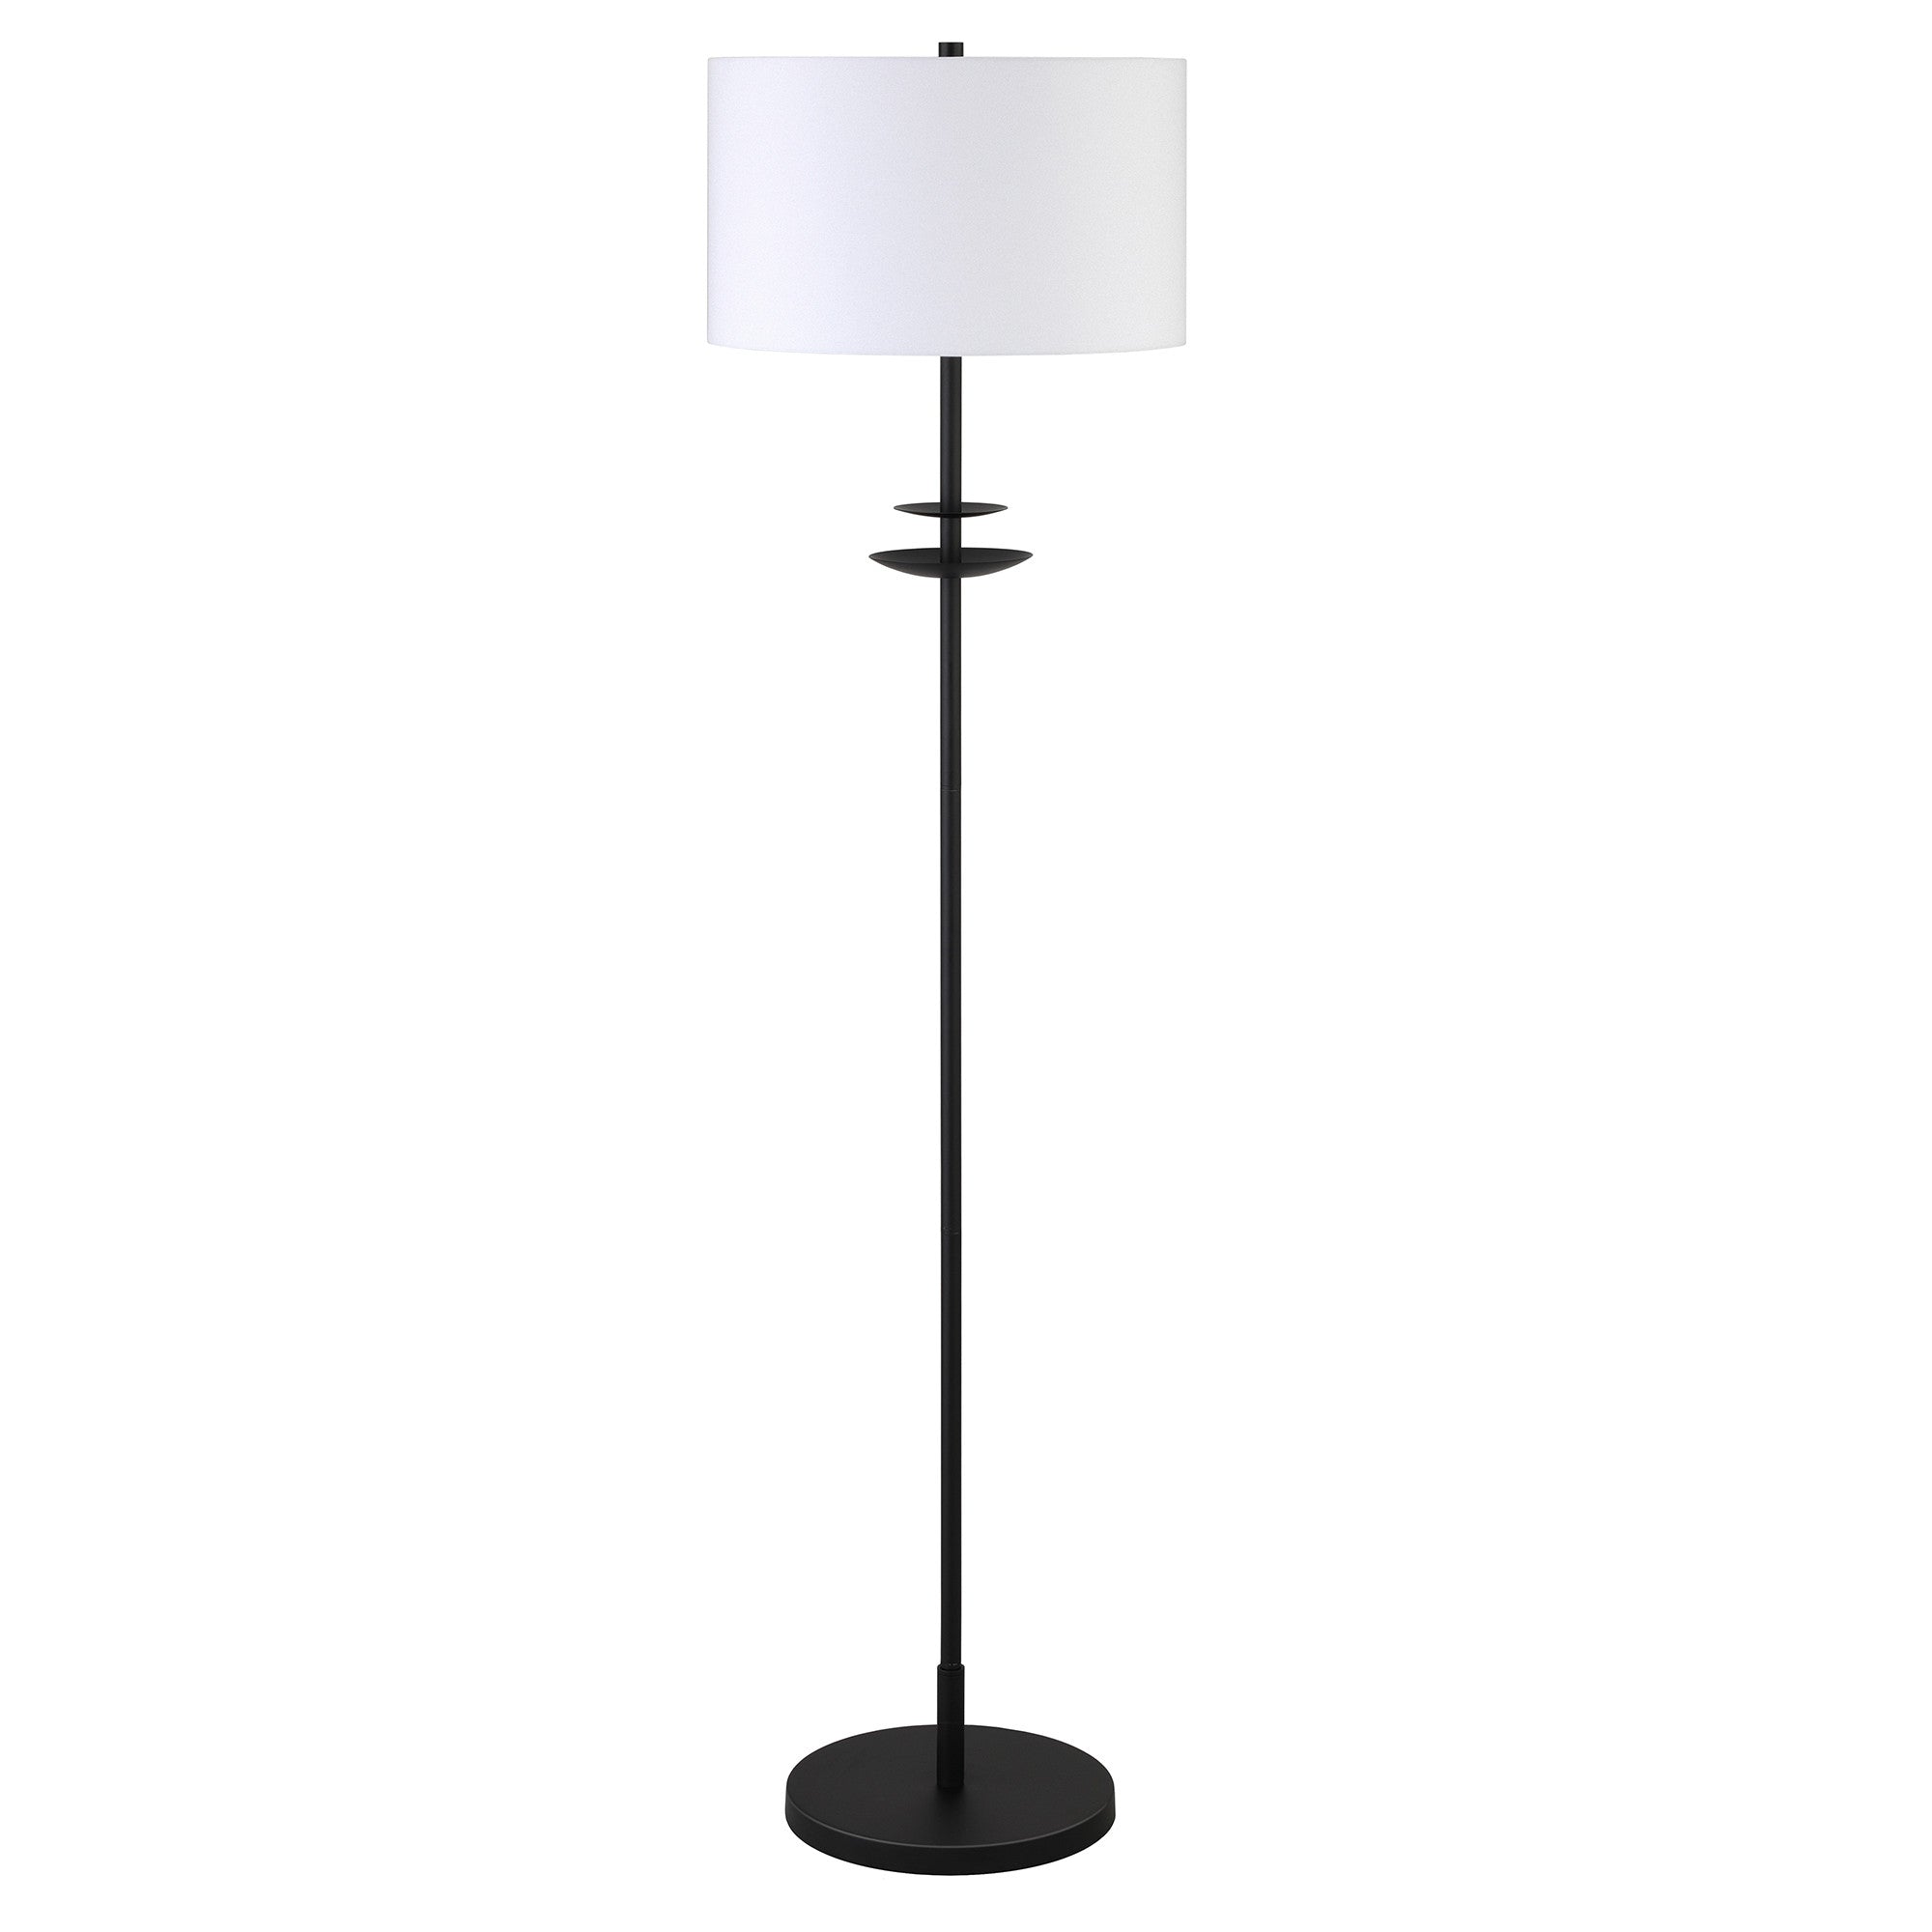 63" Black Traditional Shaped Floor Lamp With White Frosted Glass Drum Shade